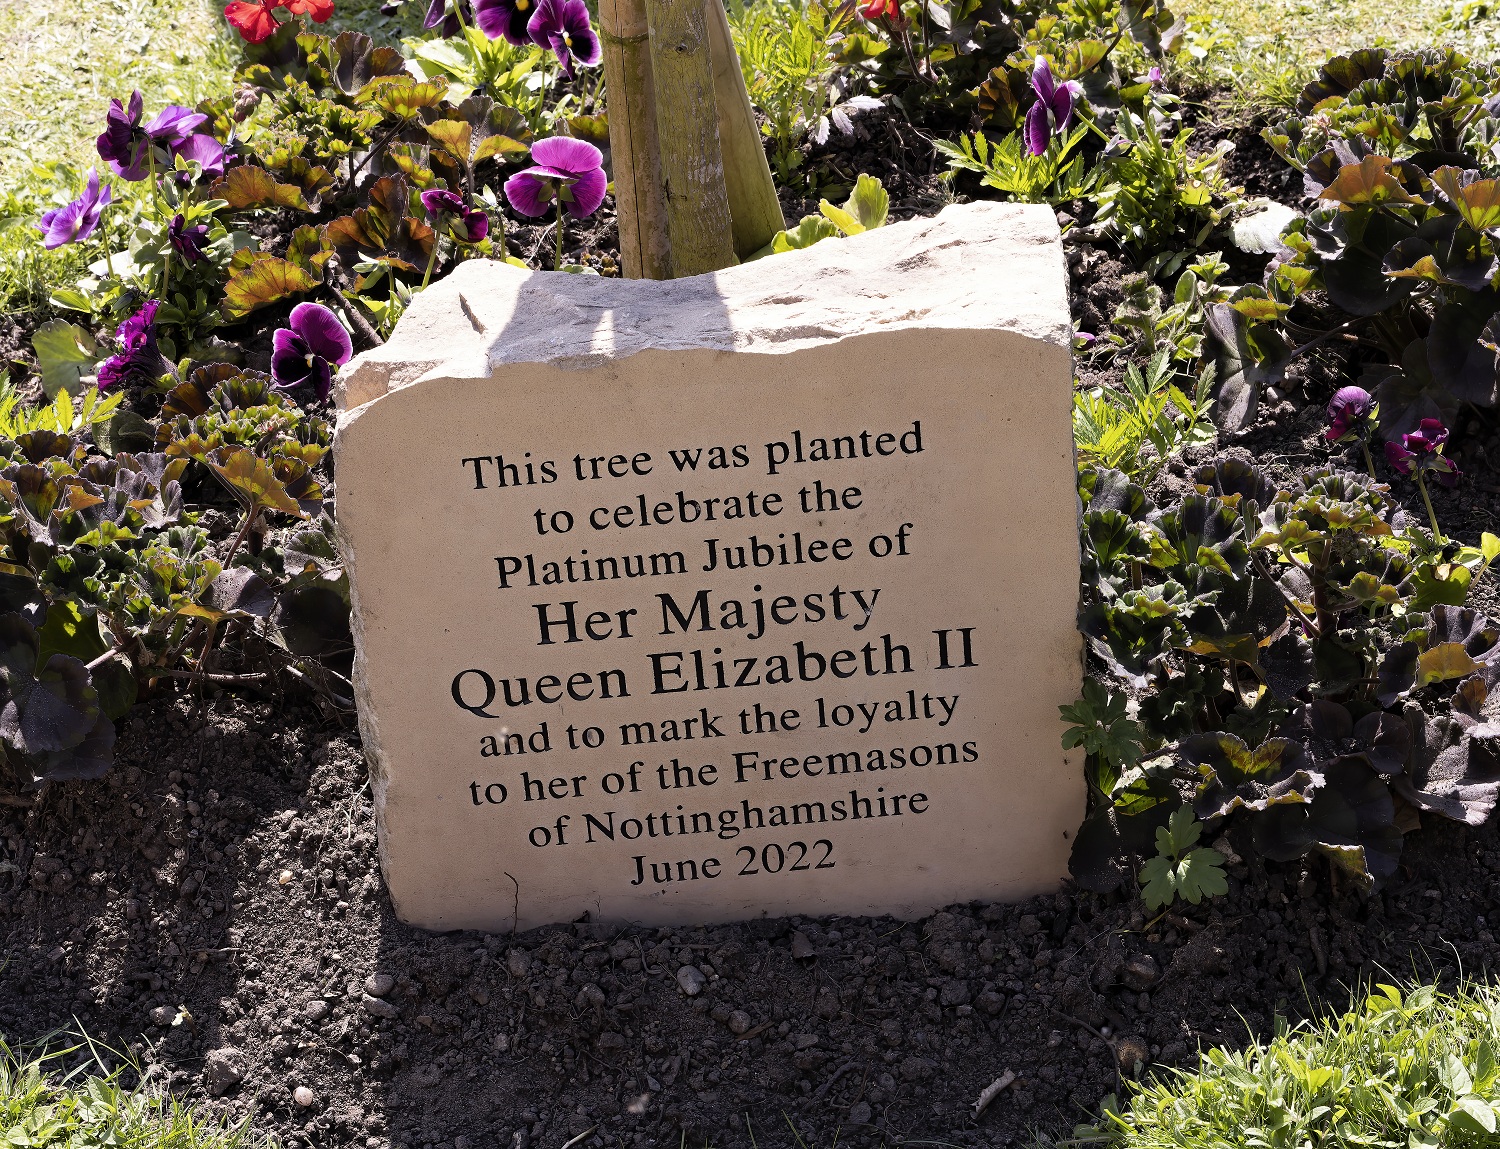 The tree planted in recognition of Queen Elizabeth II